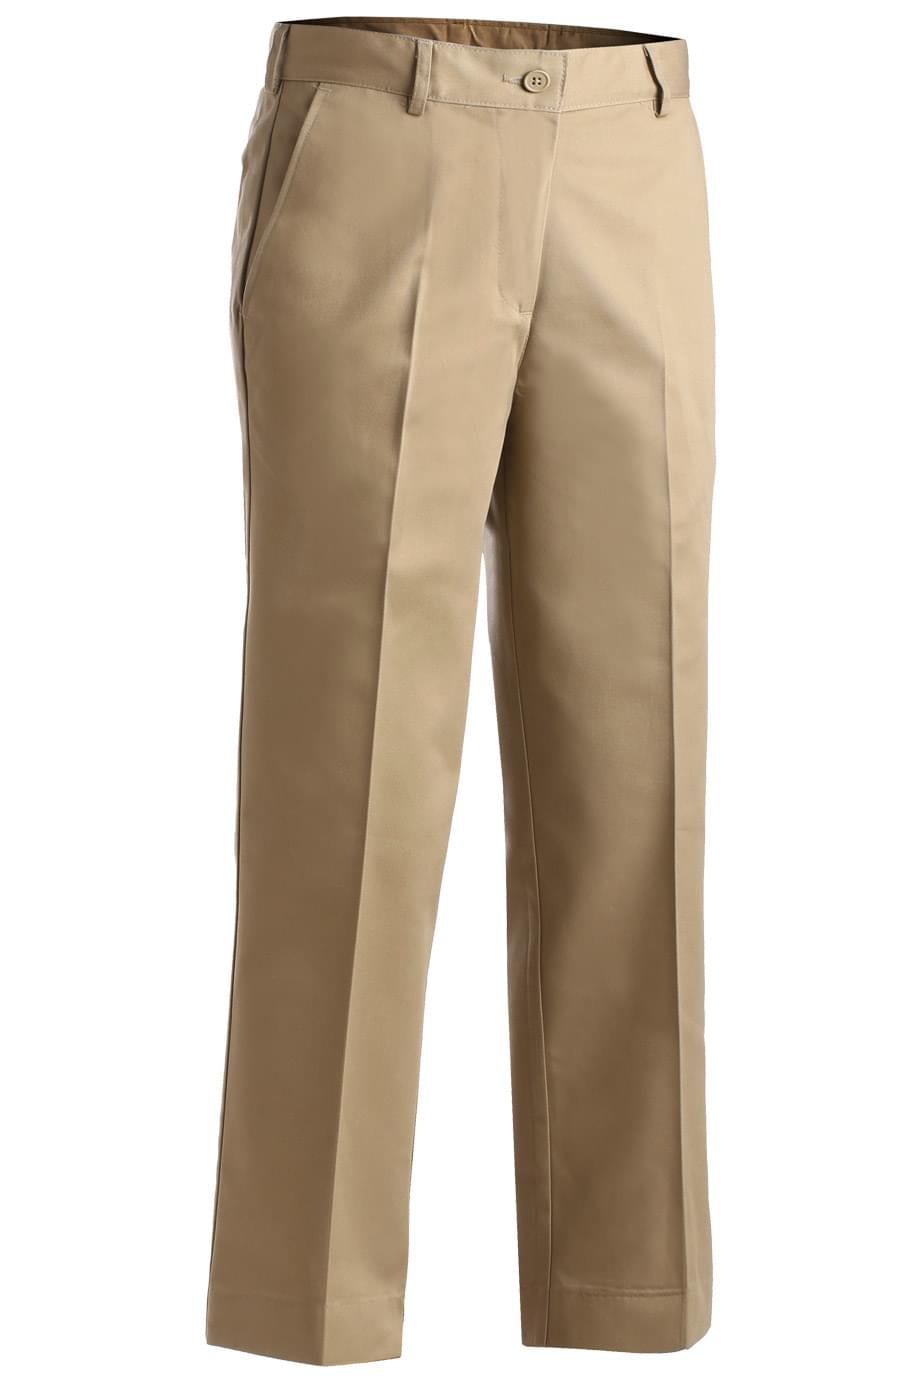 Edwards Ladies' Easy Fit Chino Flat Front Pant - Walmart.com